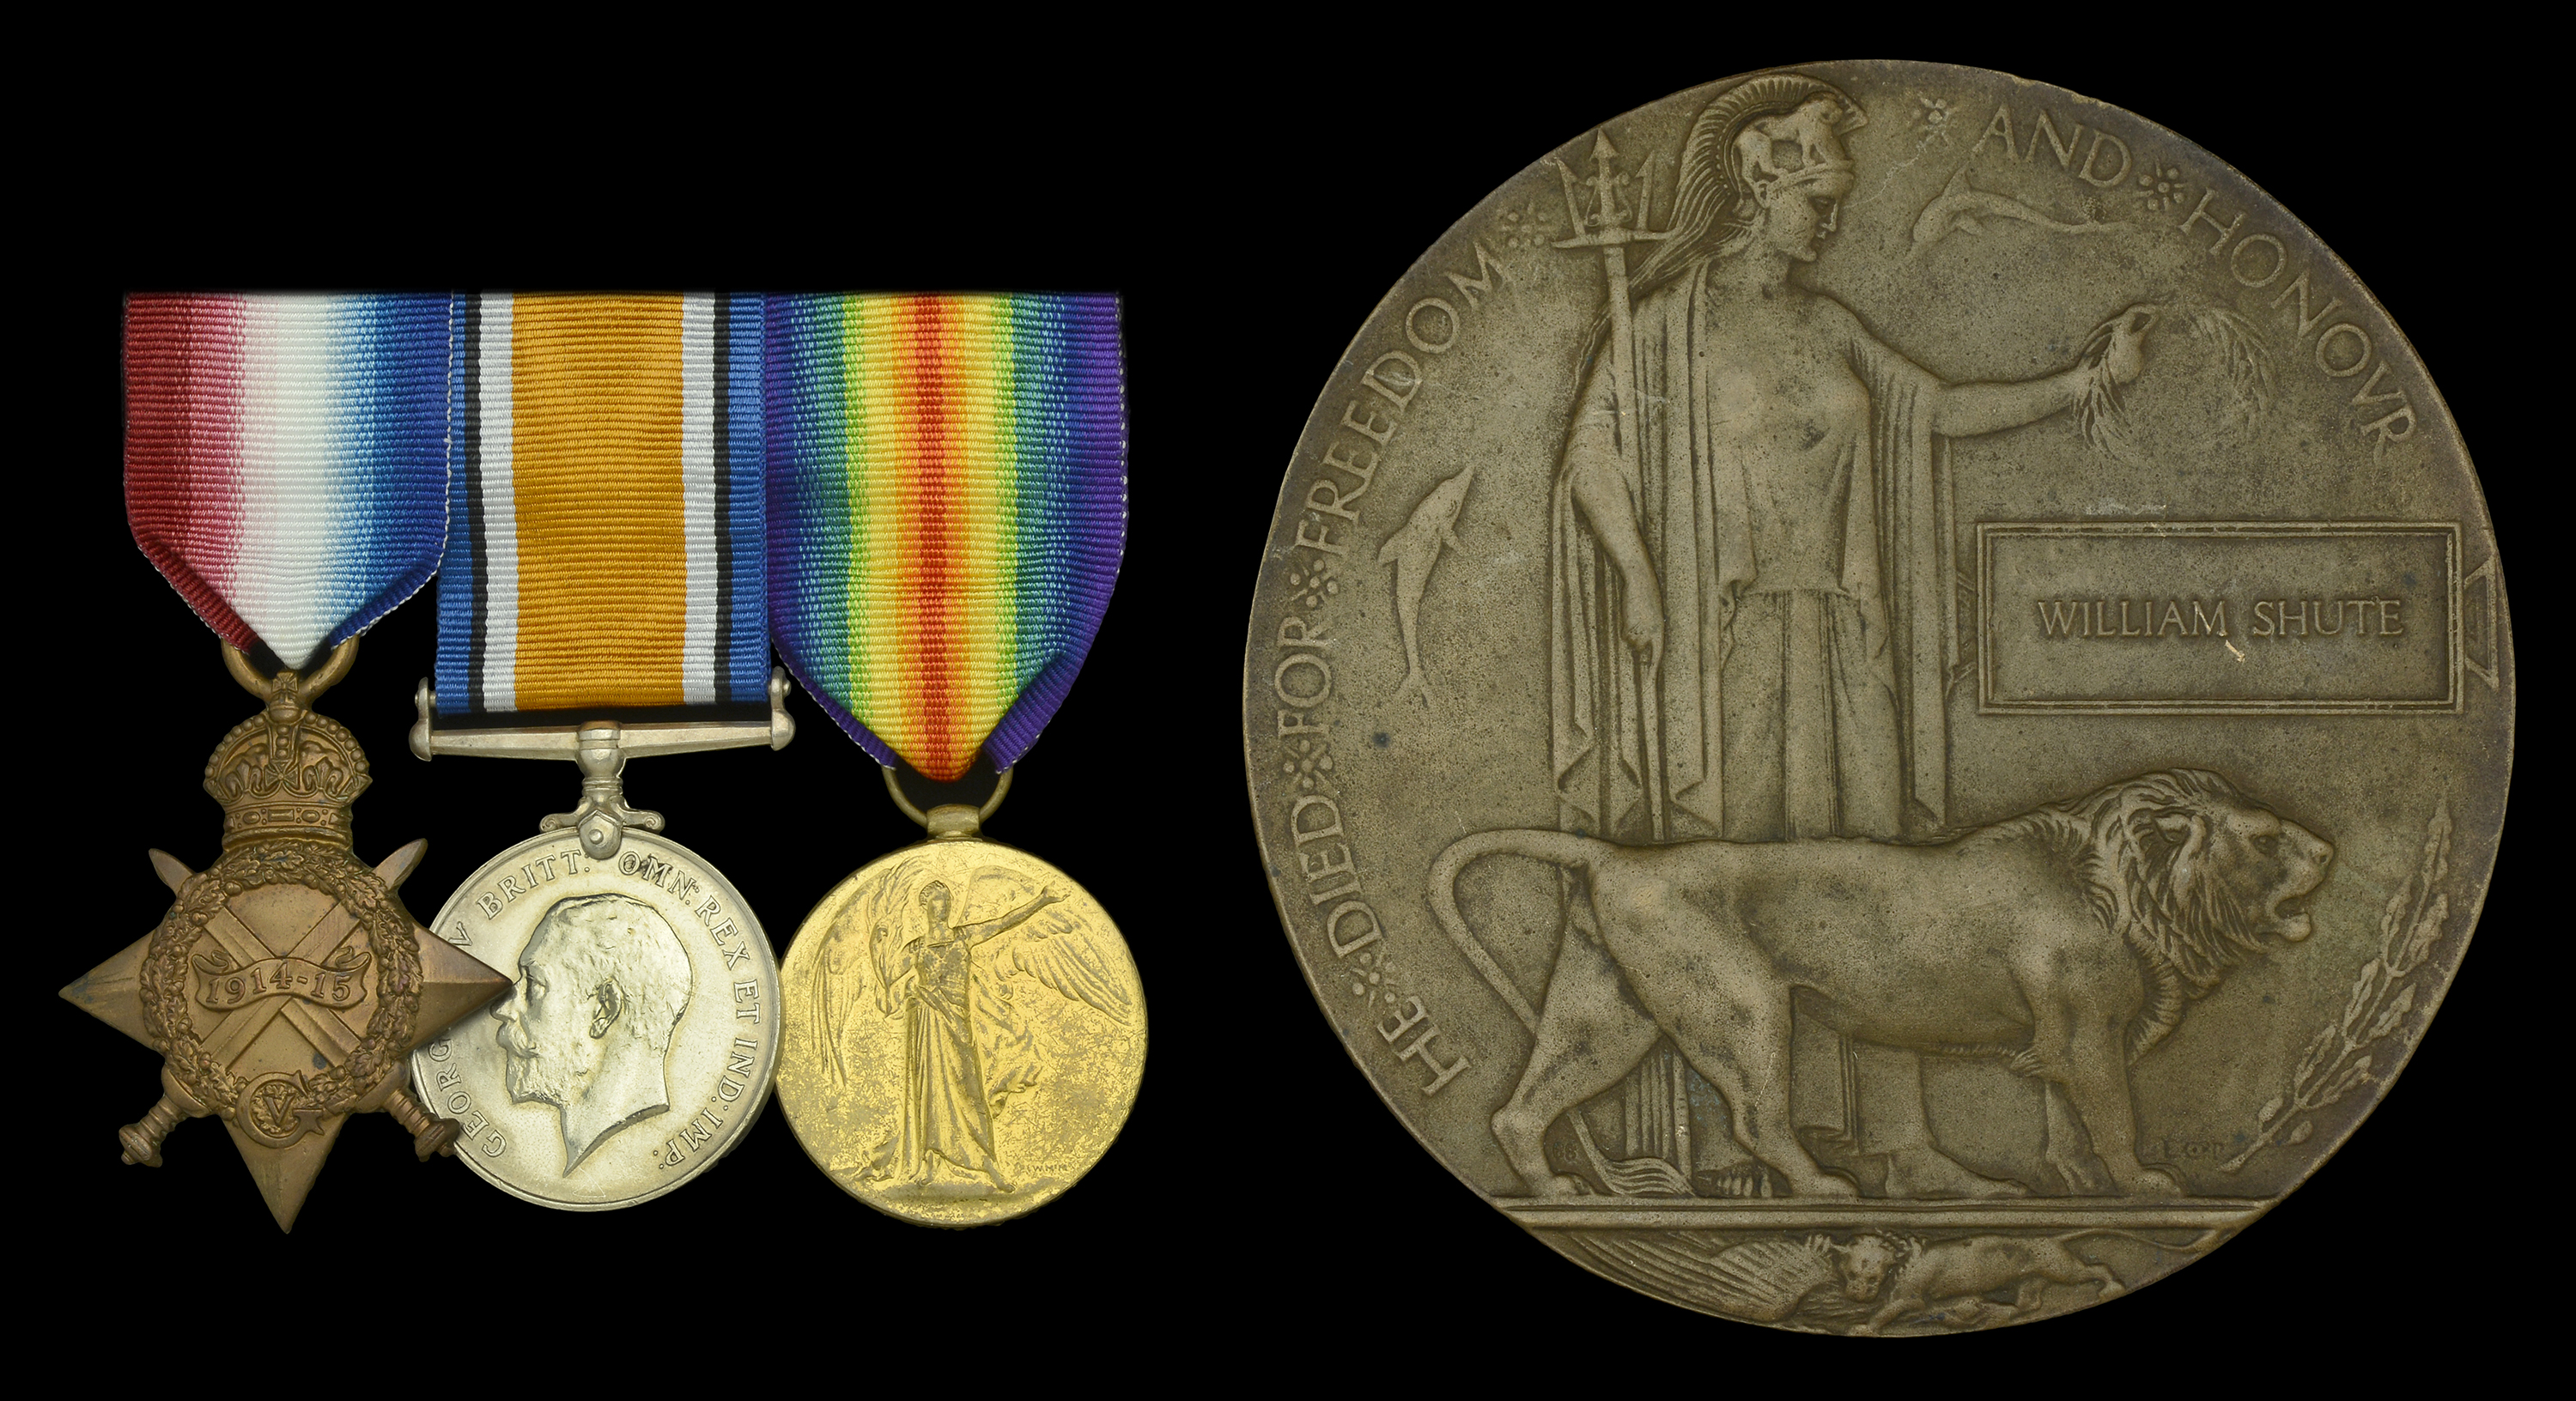 Three: Able Seaman W. Shute, Anson Battalion, R.N.D., who was killed in action at Gallipoli...